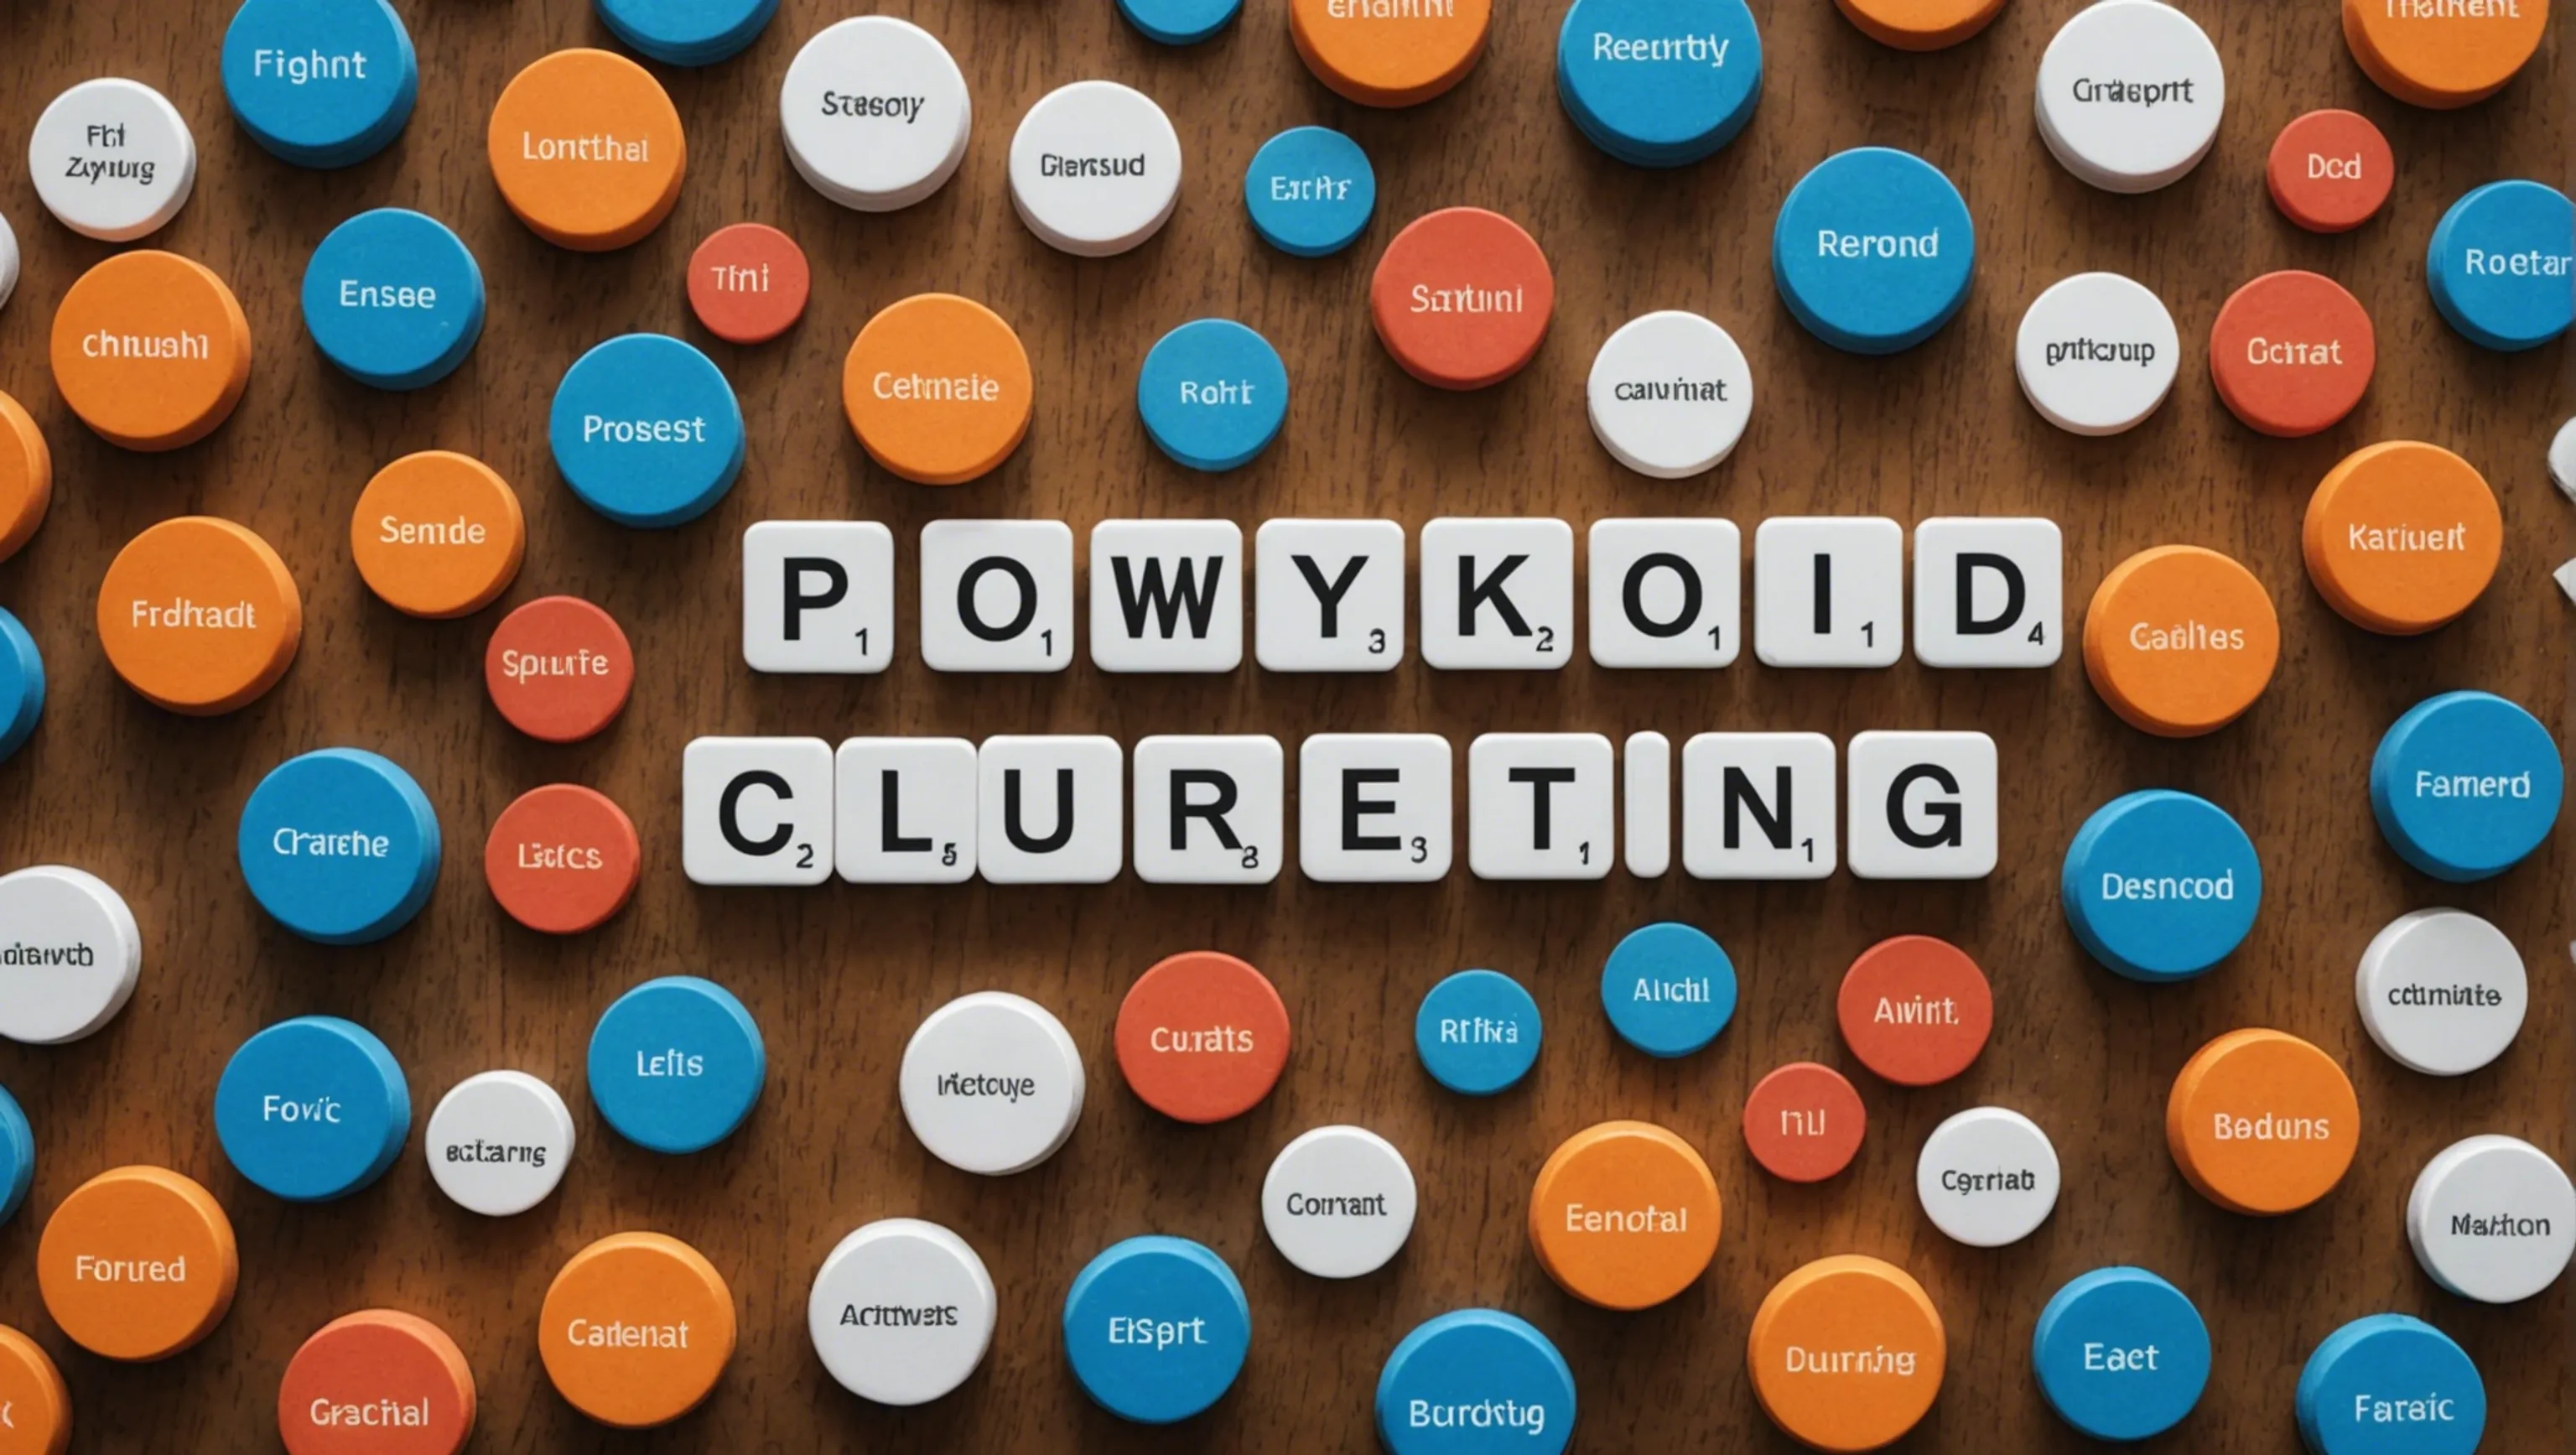 Illustration of keyword grouping and clustering for effective marketing